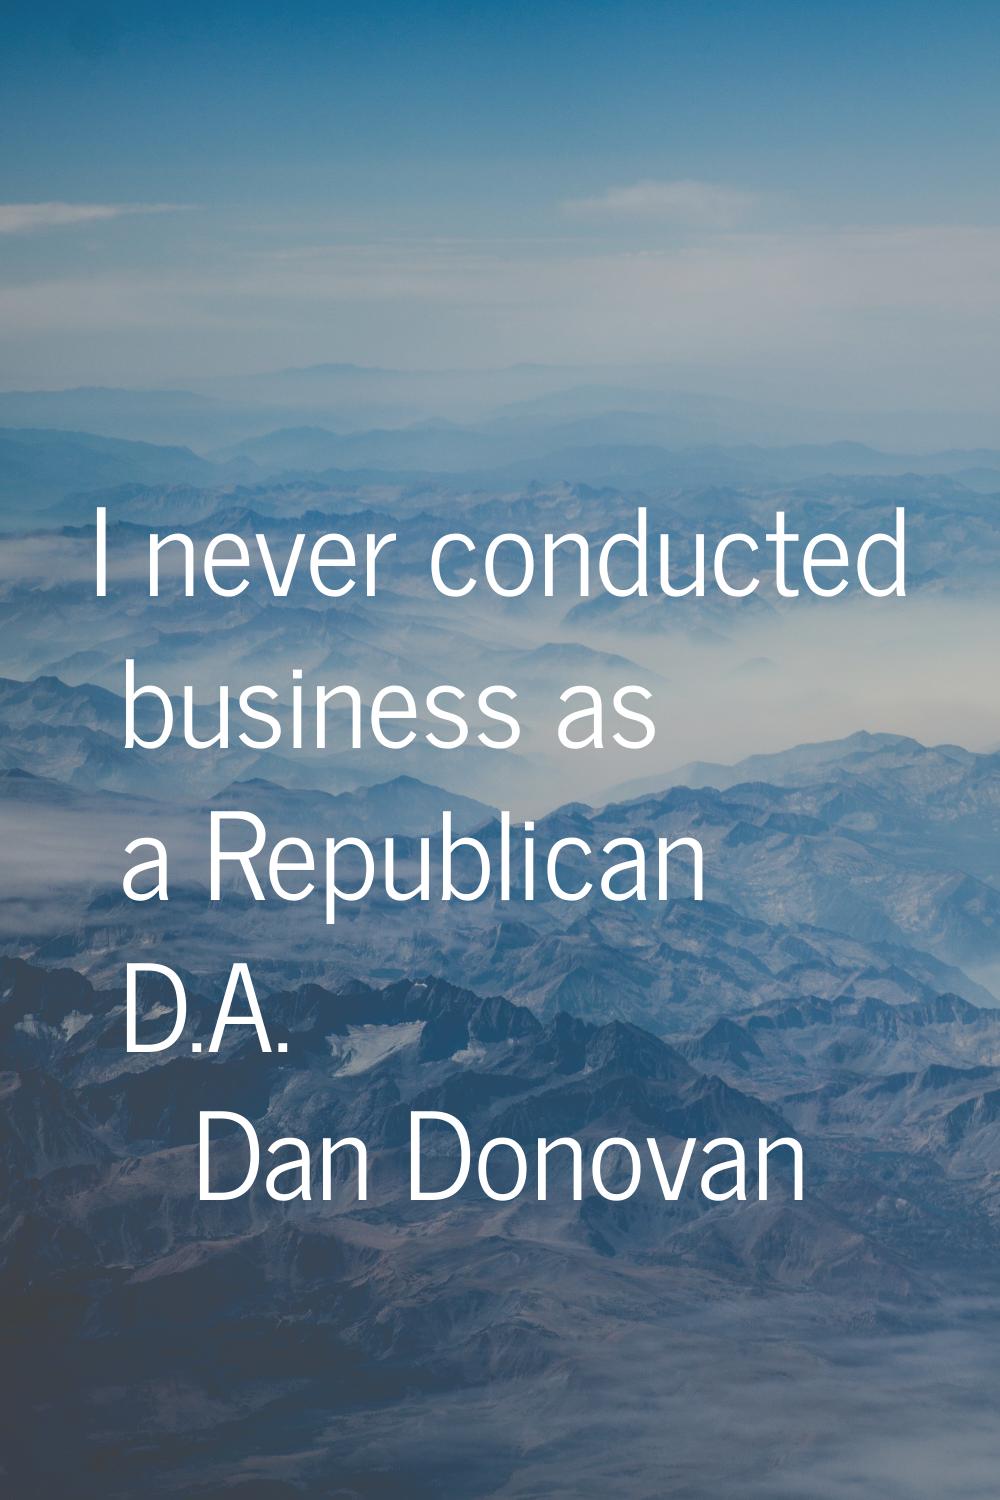 I never conducted business as a Republican D.A.